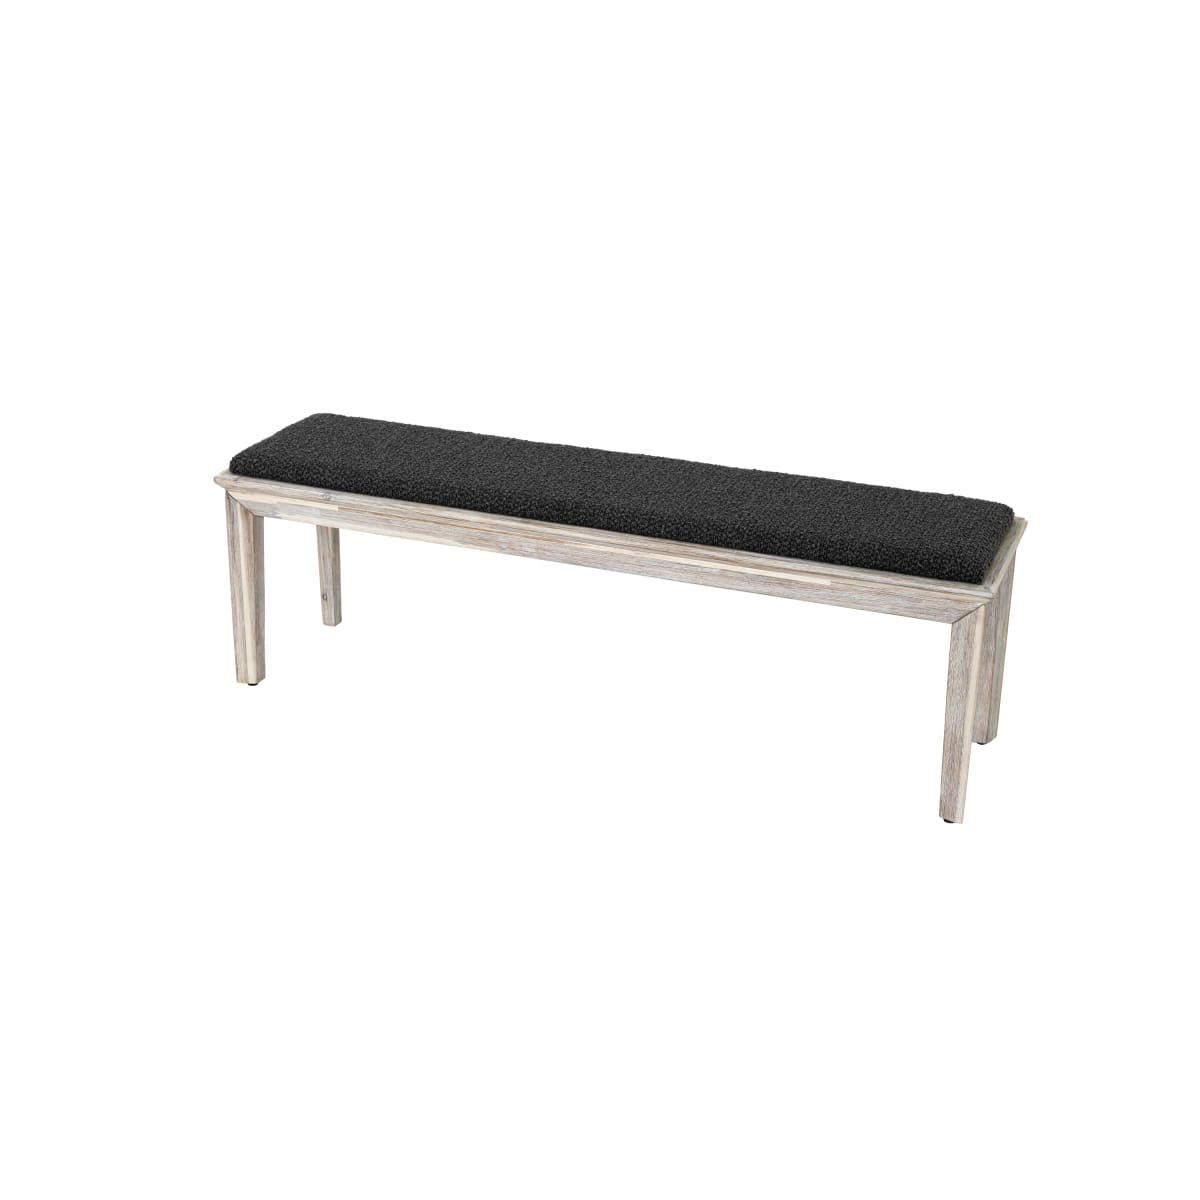 Mendes Bench - benches